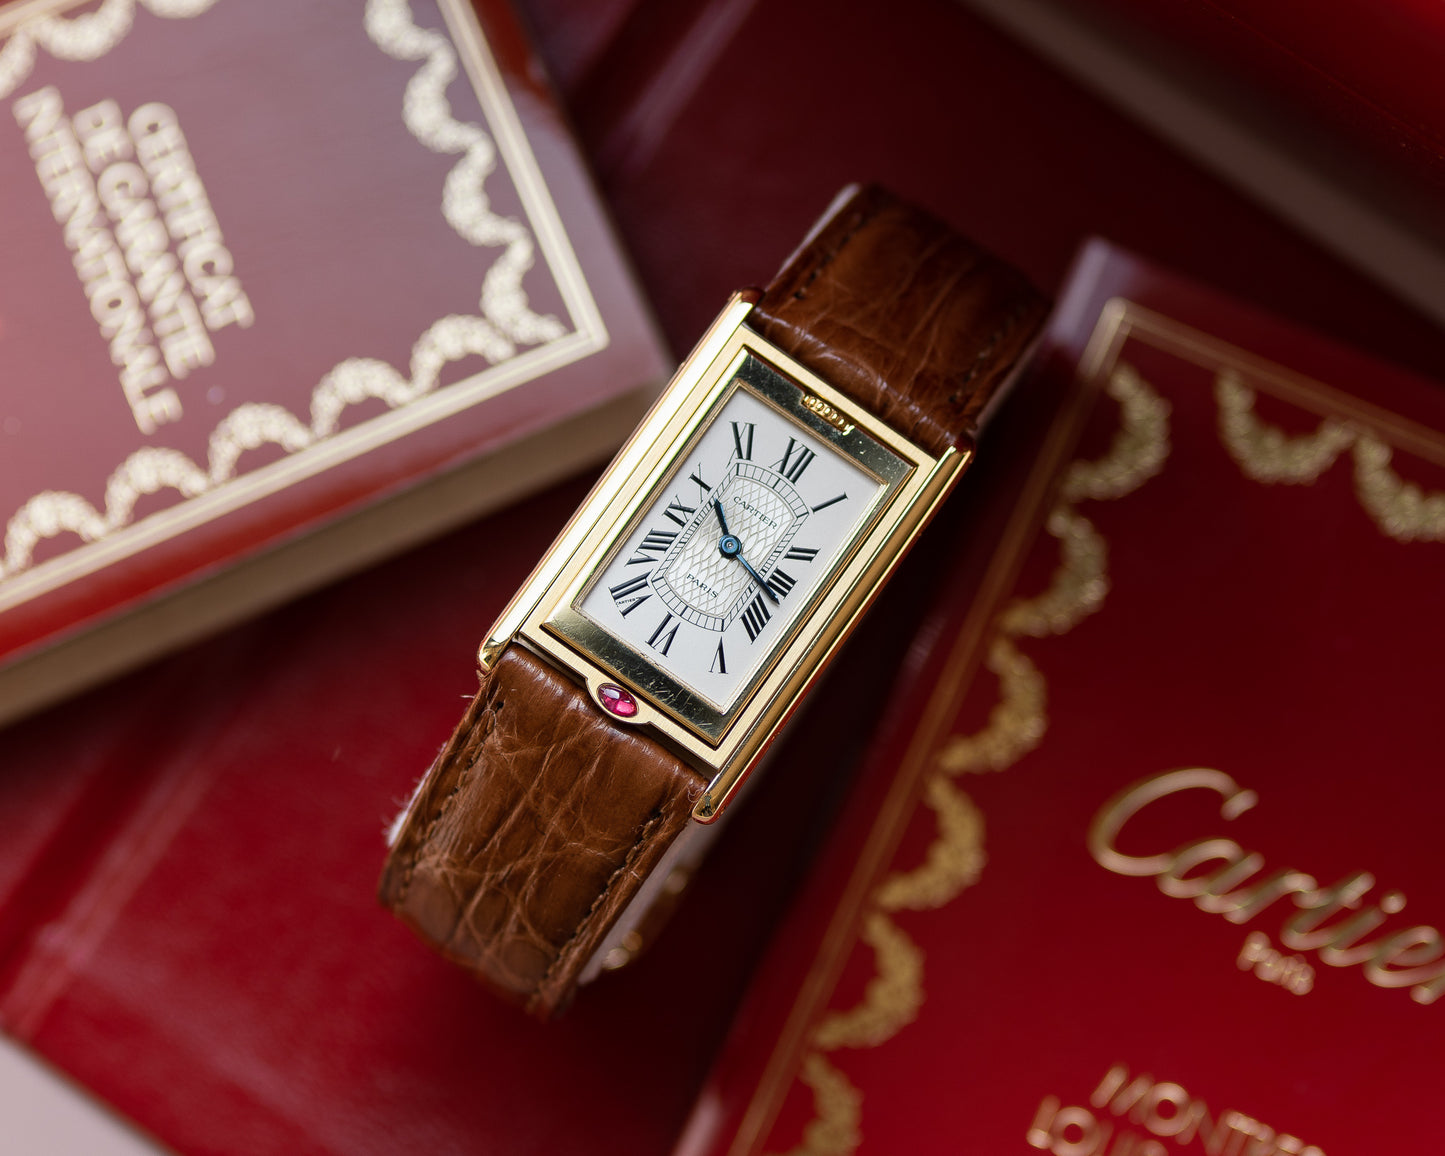 Cartier Tank Basculante - I Love Cartier 150th Anniversary - Limited edition 150